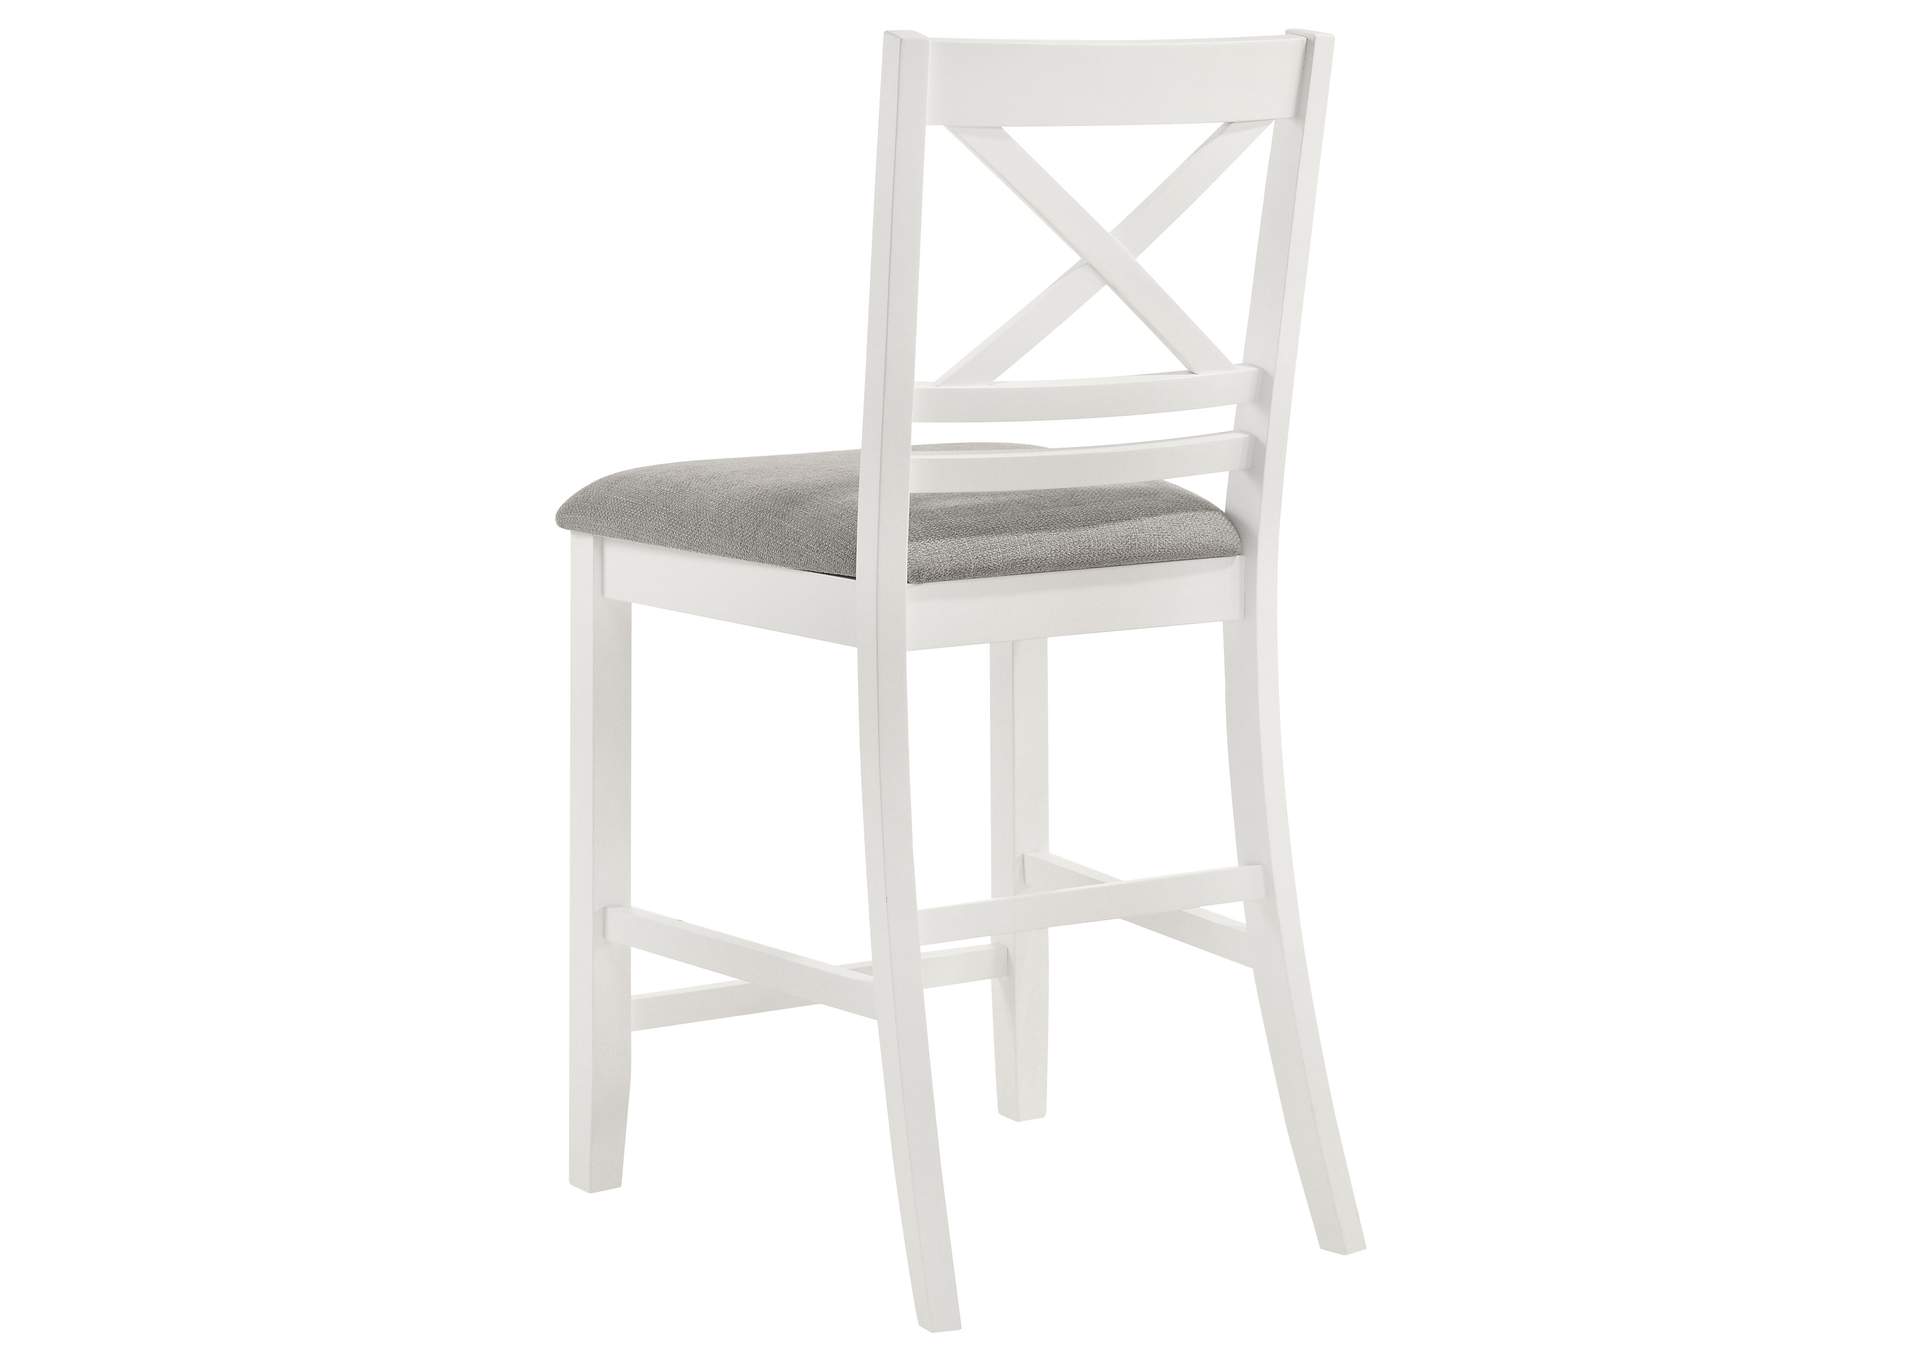 COUNTER HT DINING CHAIR,Coaster Furniture